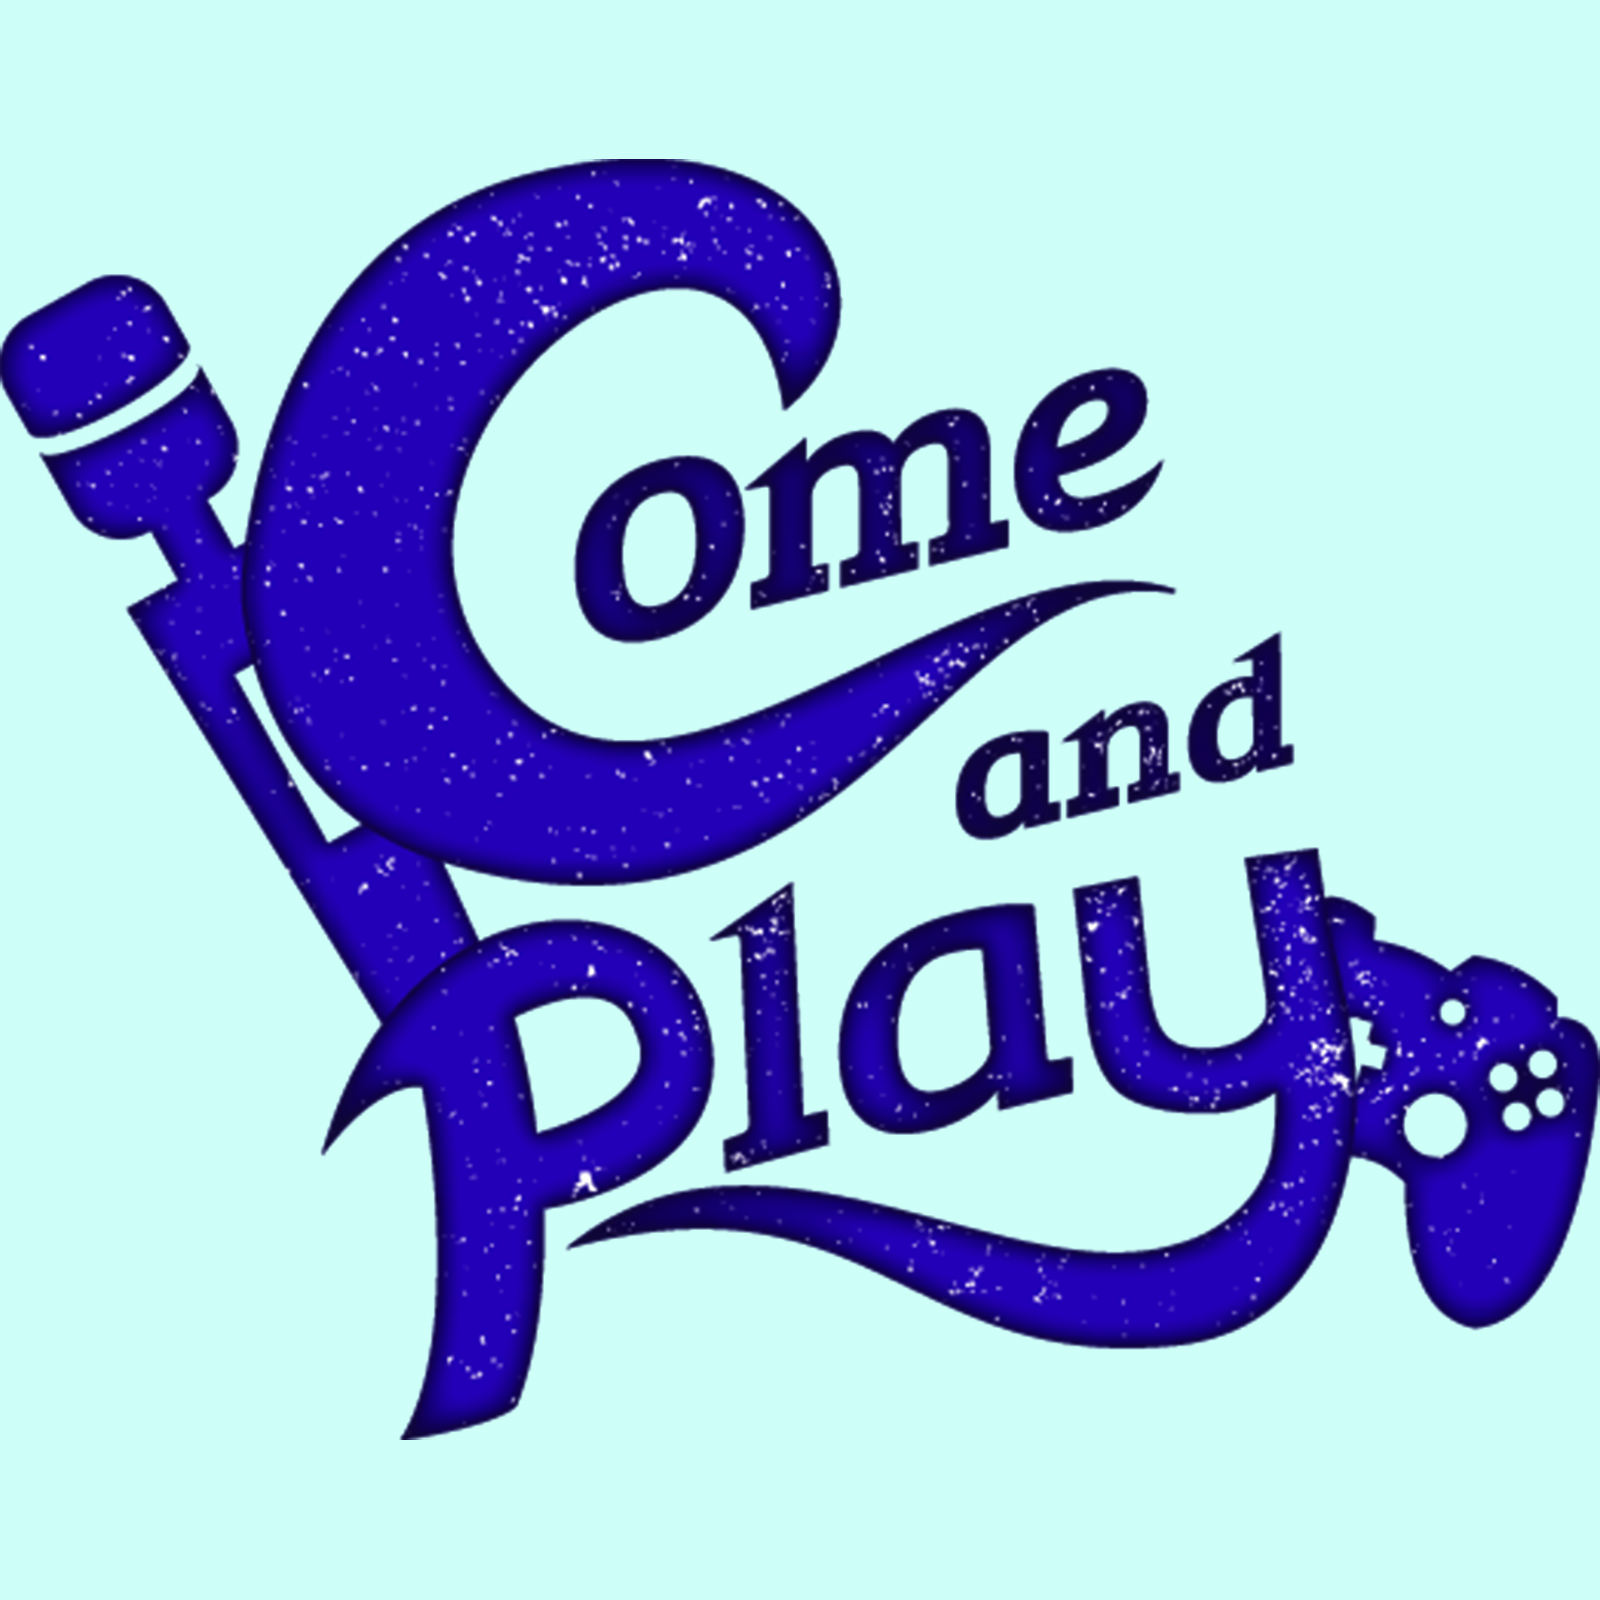 Come player. Come Play. I came. Don't Play with me logo. The better for the Kids Bomb.